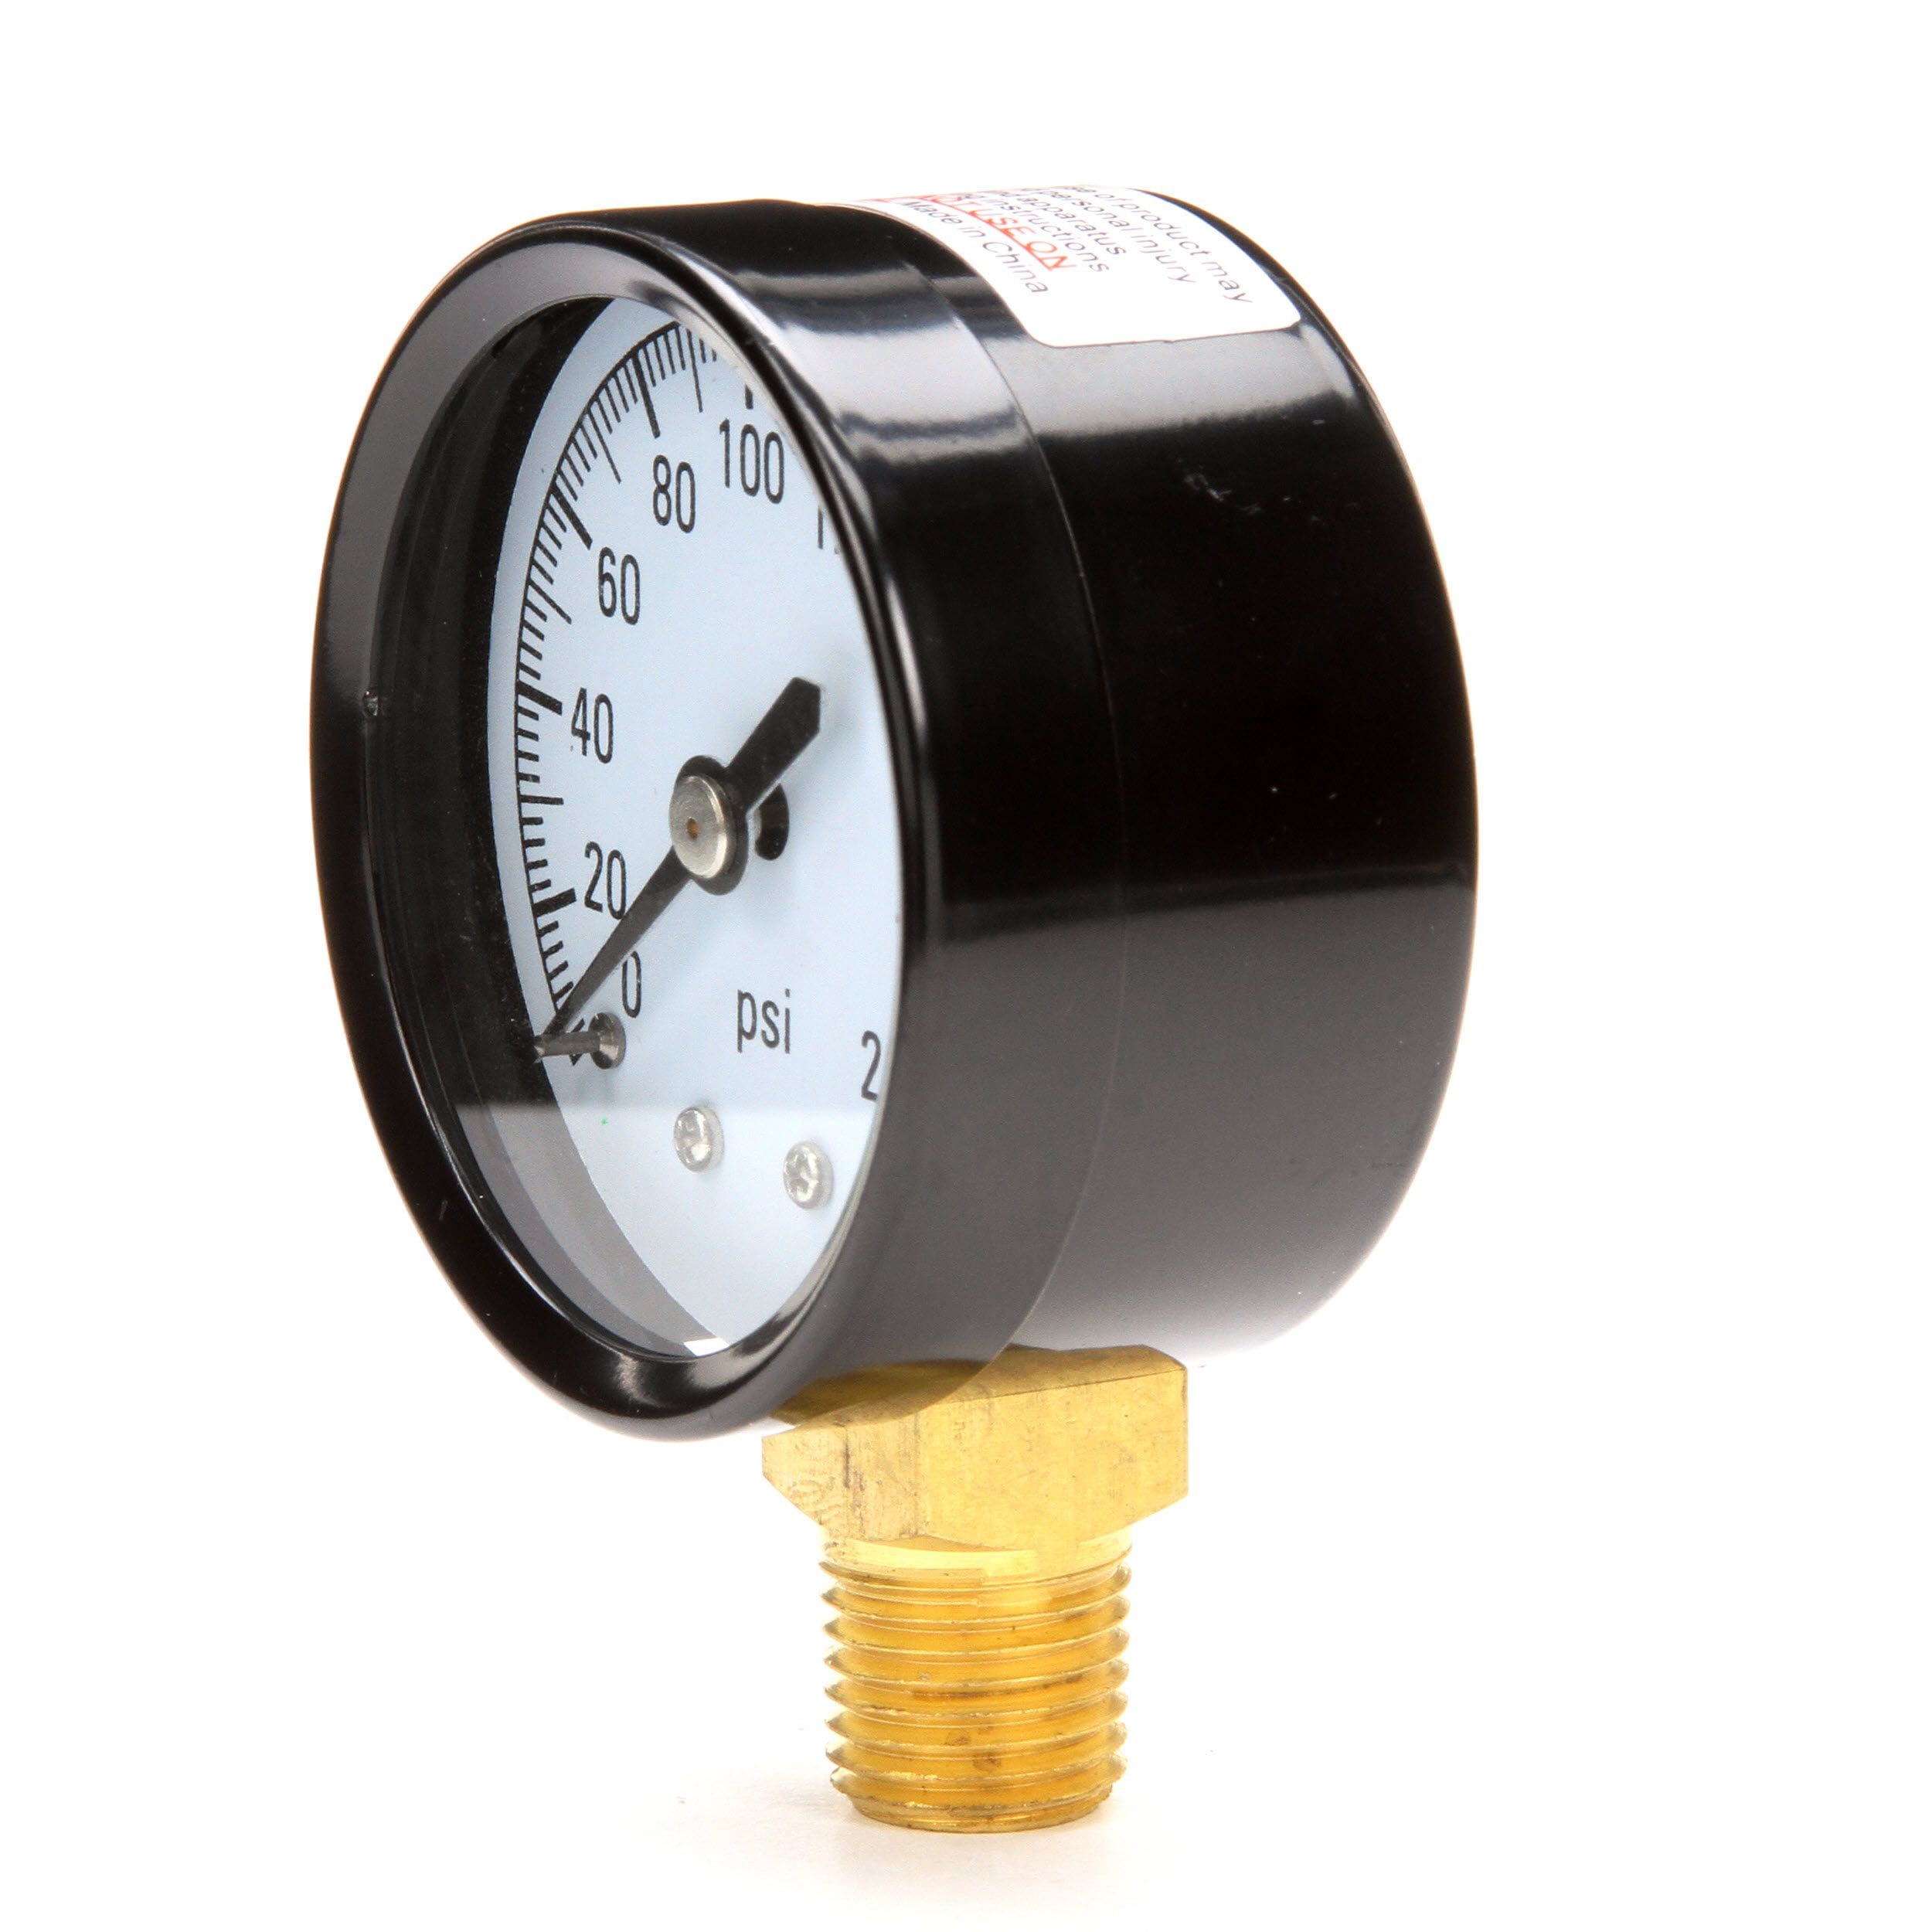 Measureman 2 Forged Brass Gas Pressure Test Gauge Assembly 3/4 FNPT Connection 0-30psi -3-2-3% Accuracy 